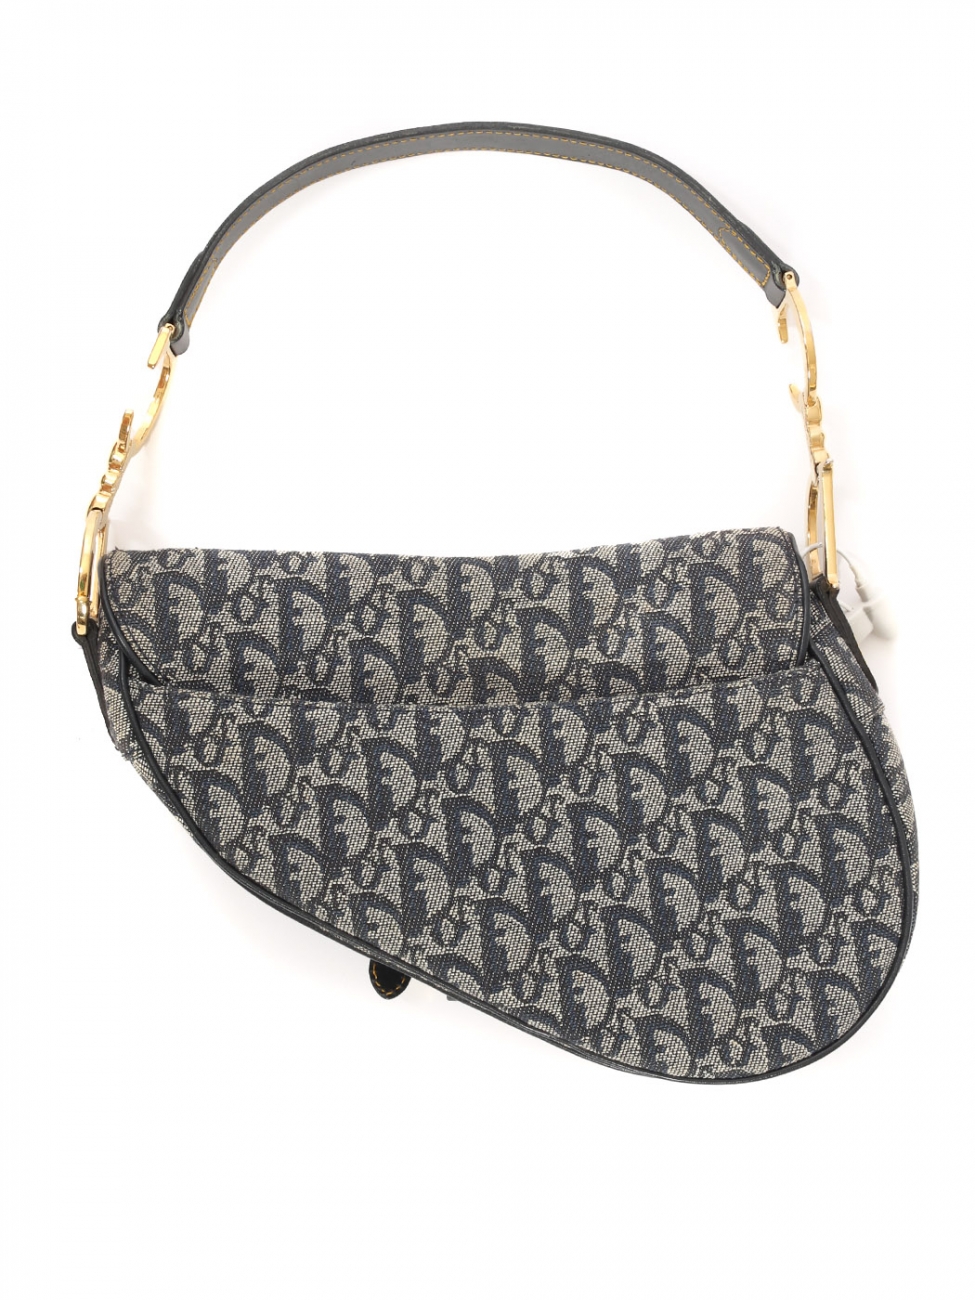 Boutique CHRISTIAN DIOR Iconic Saddle bag in blue and beige monogram printed  canvas Retail price €3500